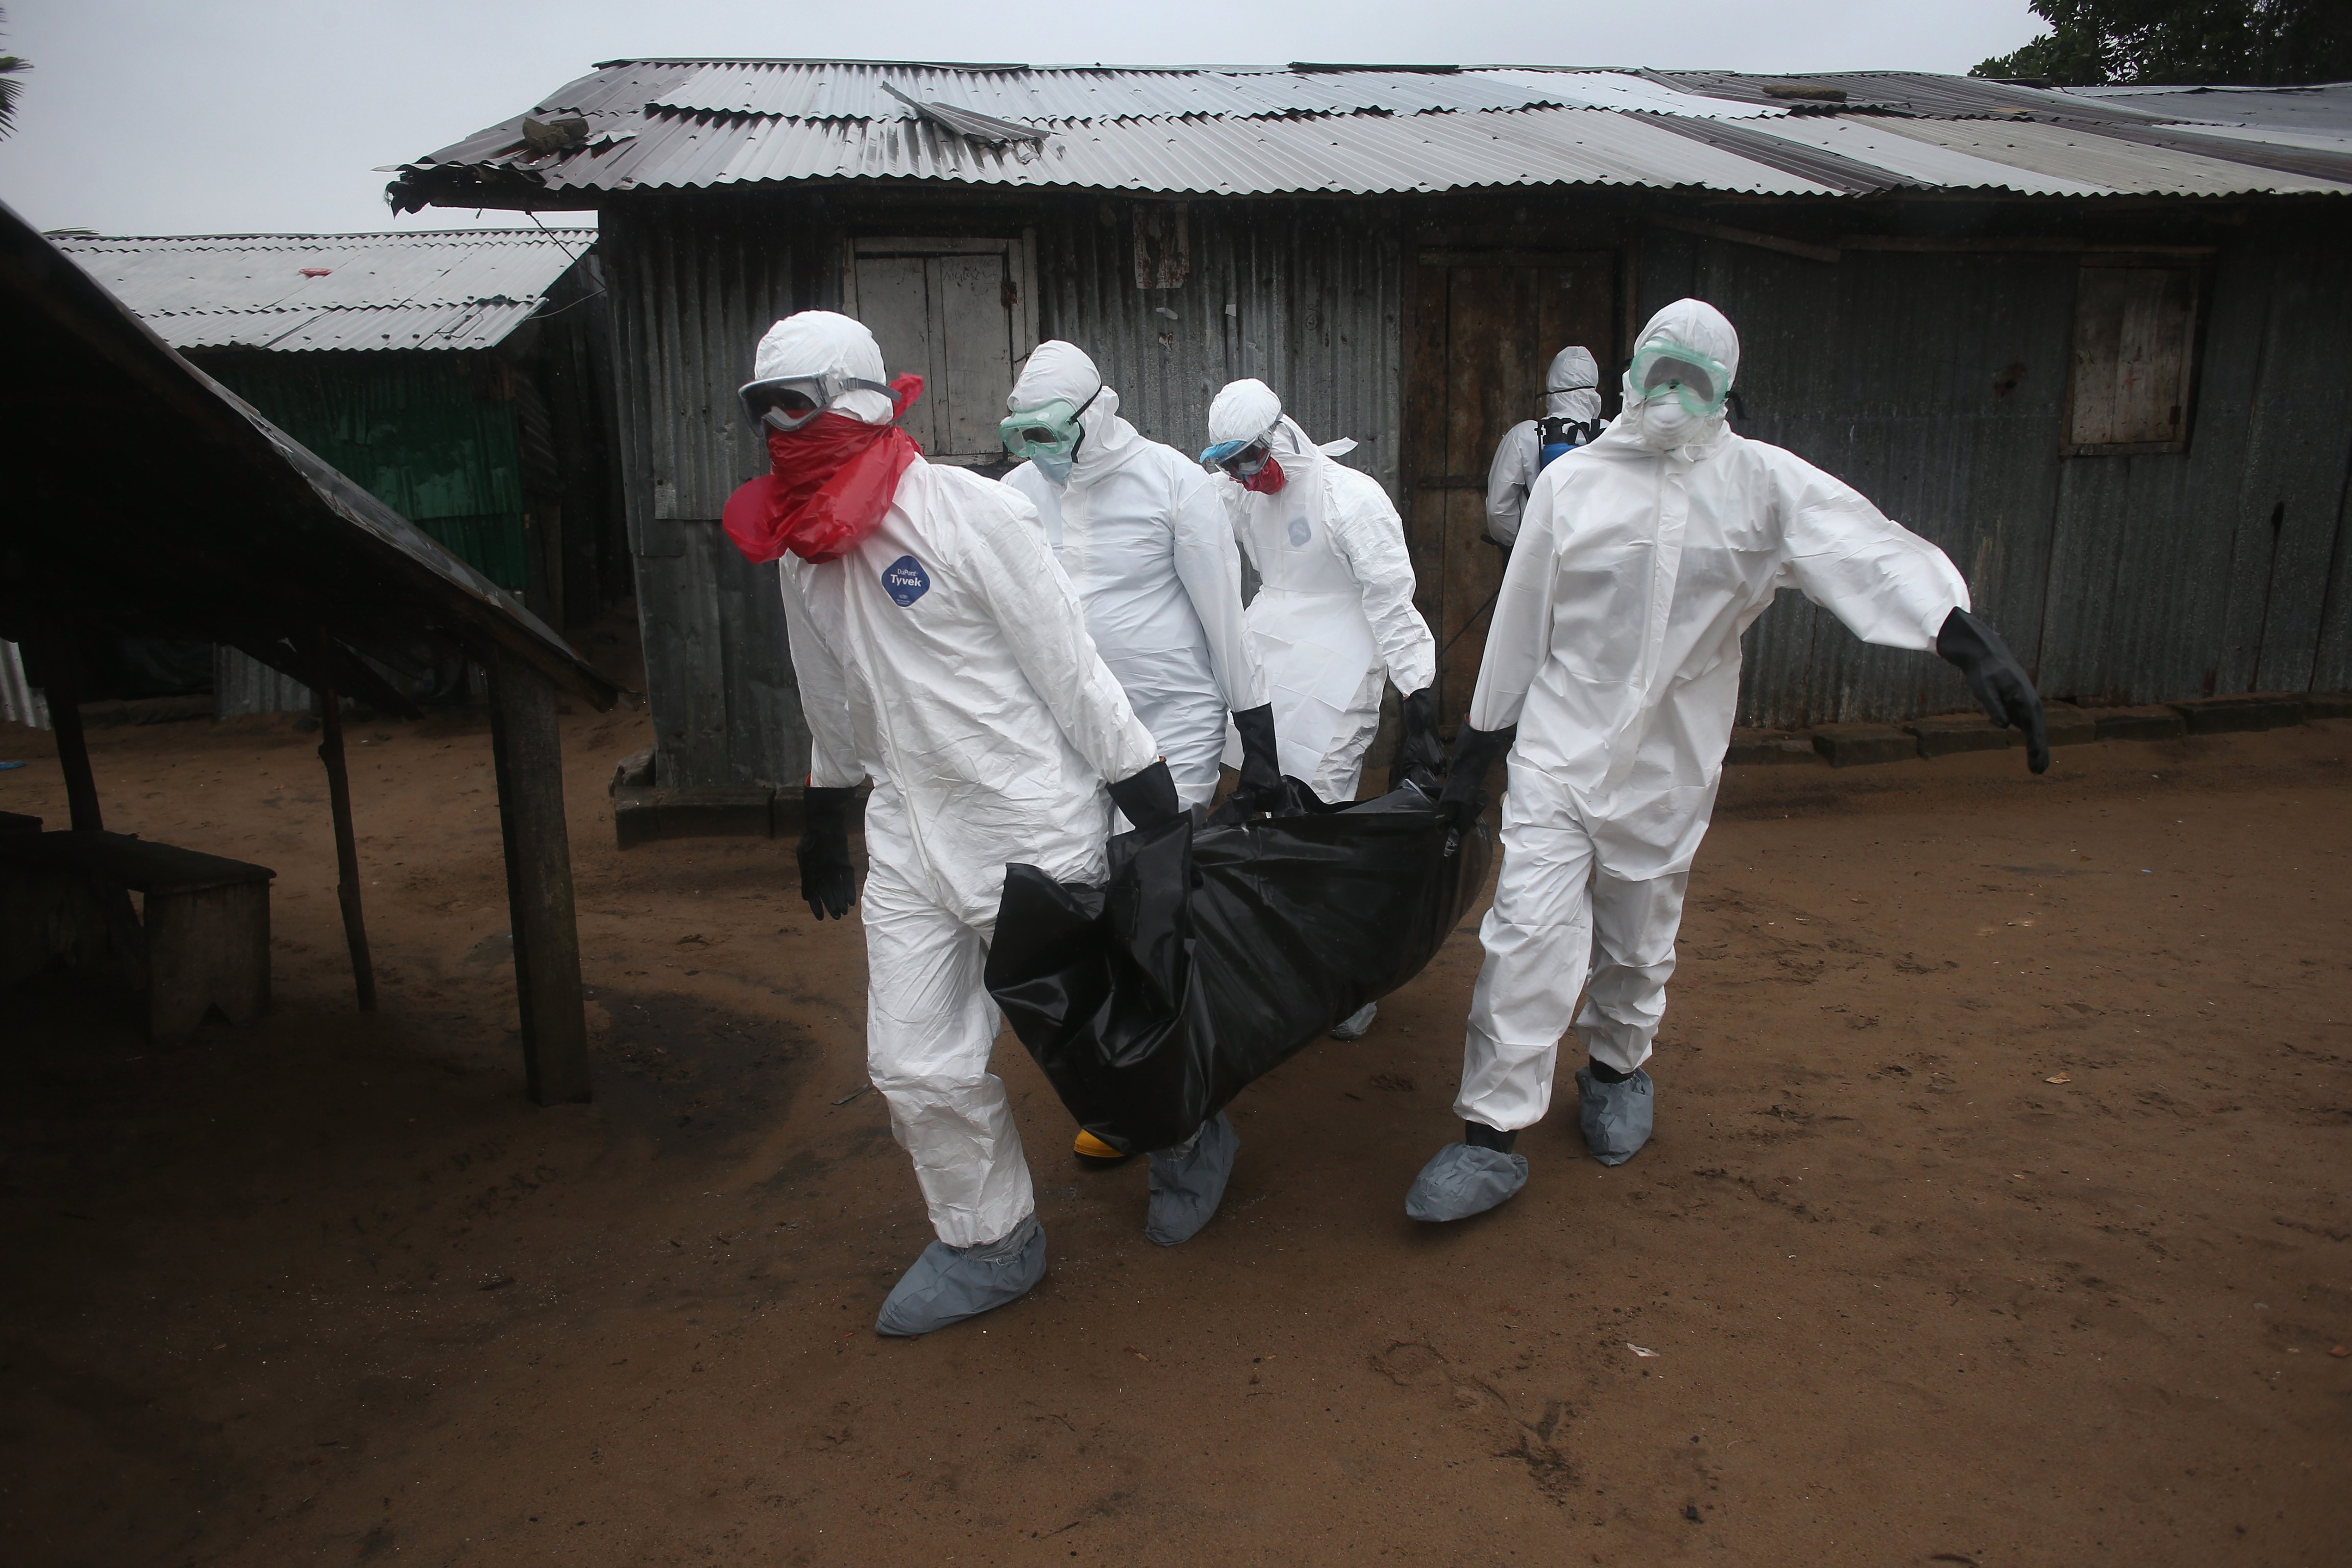 A Liberian burial team wearing protective clothing retrieves the body of a 60-year-old Ebola victim from his home on August 17, 2014 near Monrovia, Liberia. (John Moore—Getty Images)